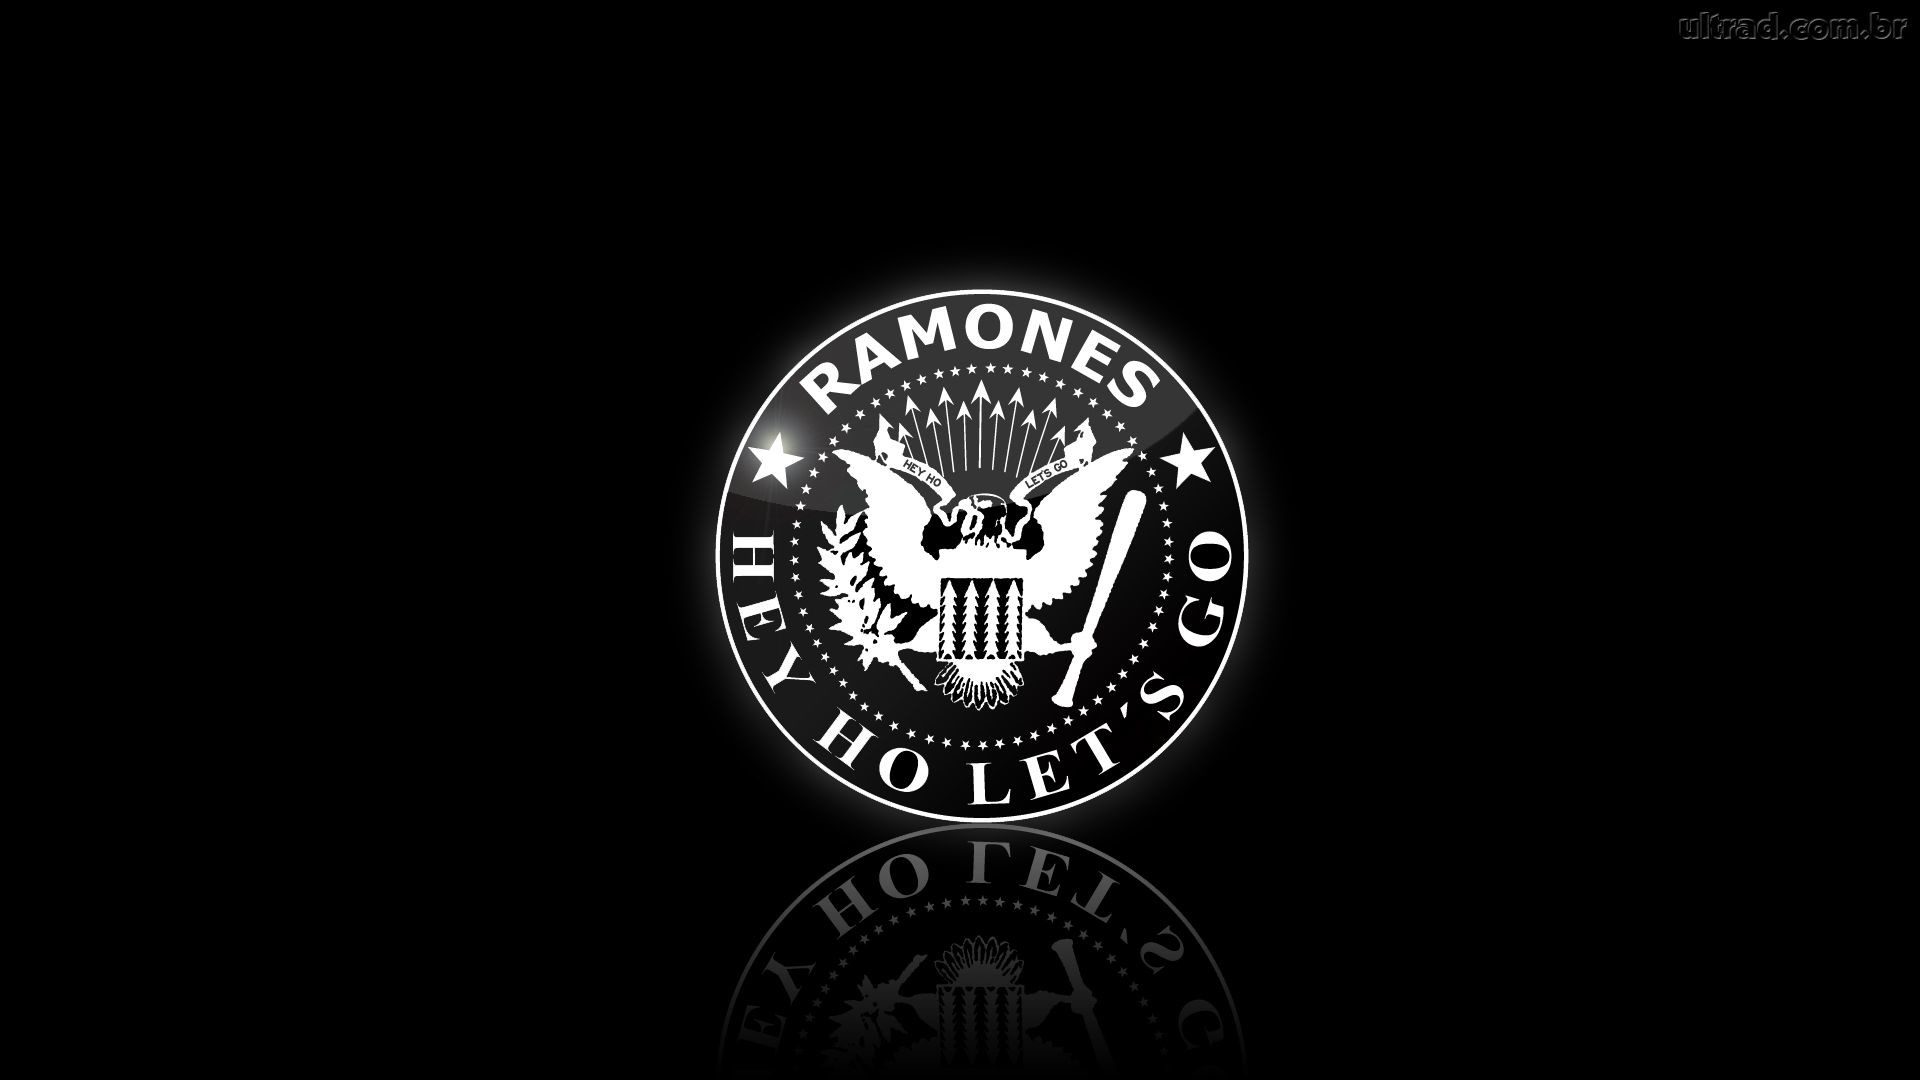 1920x1080 Best The Ramones Photos and Pictures, The Ramones Full HD Wallpapers